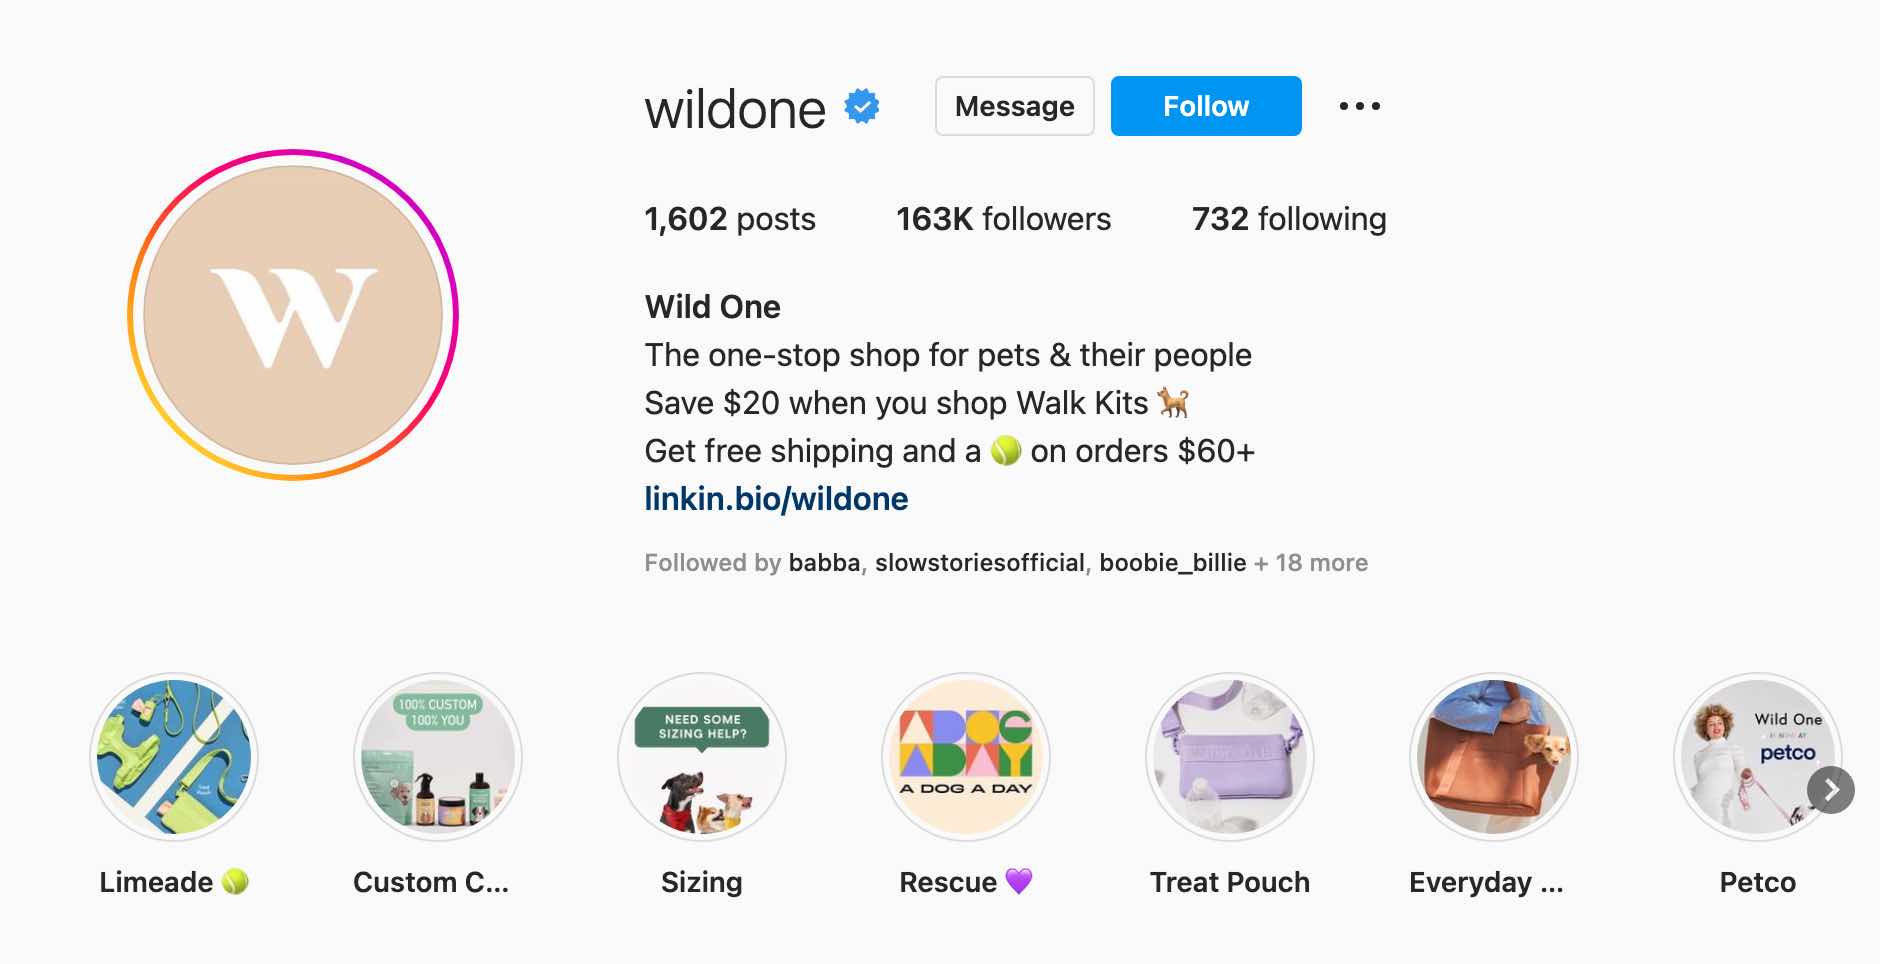 instagram marketing for small business, pet brand Wild One uses its Instagram bio to promote its small business promotions.